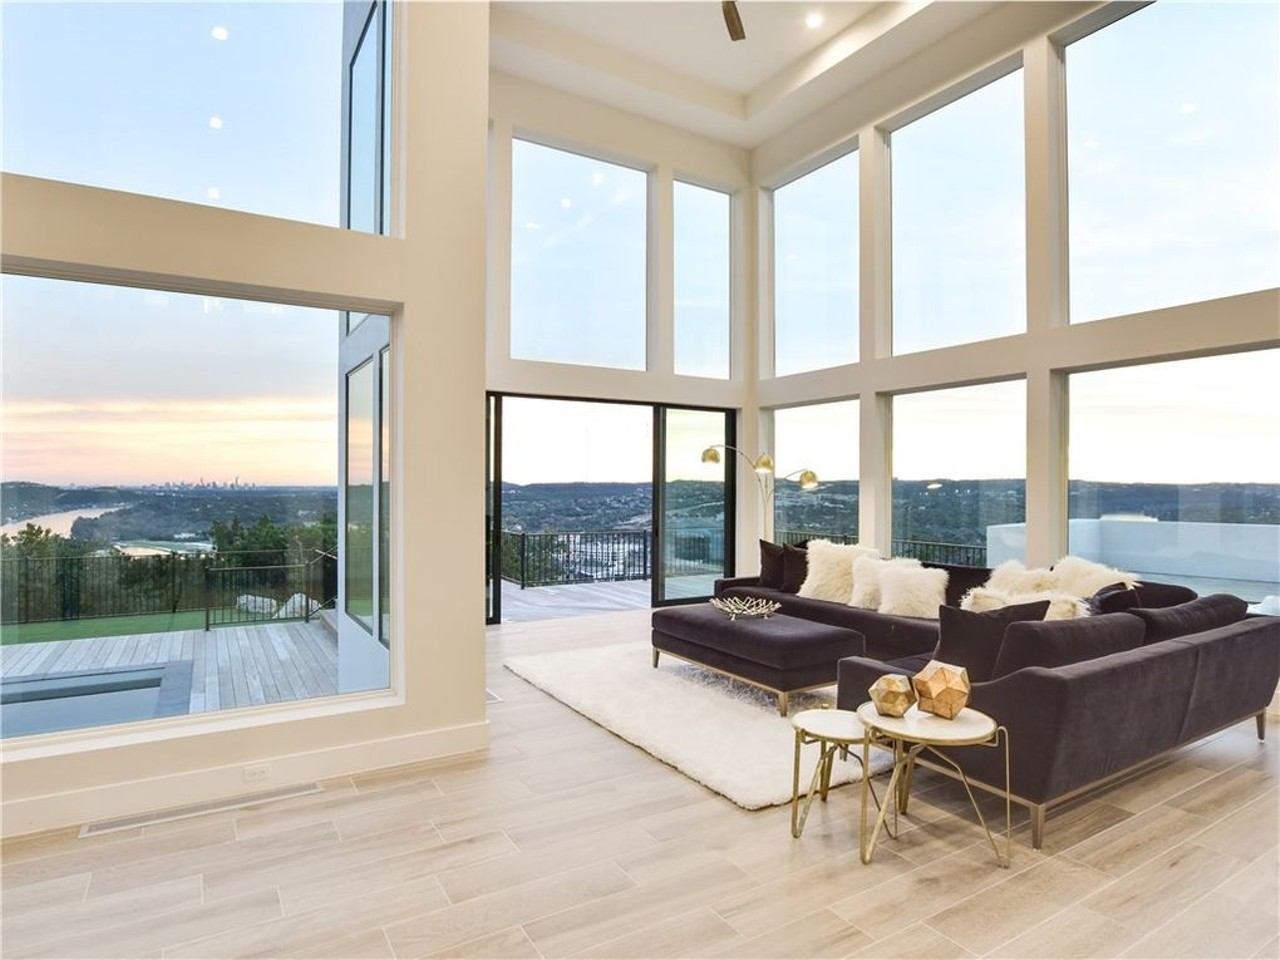 The floor-to-ceiling windows definitely provide an open feel in the common spaces.